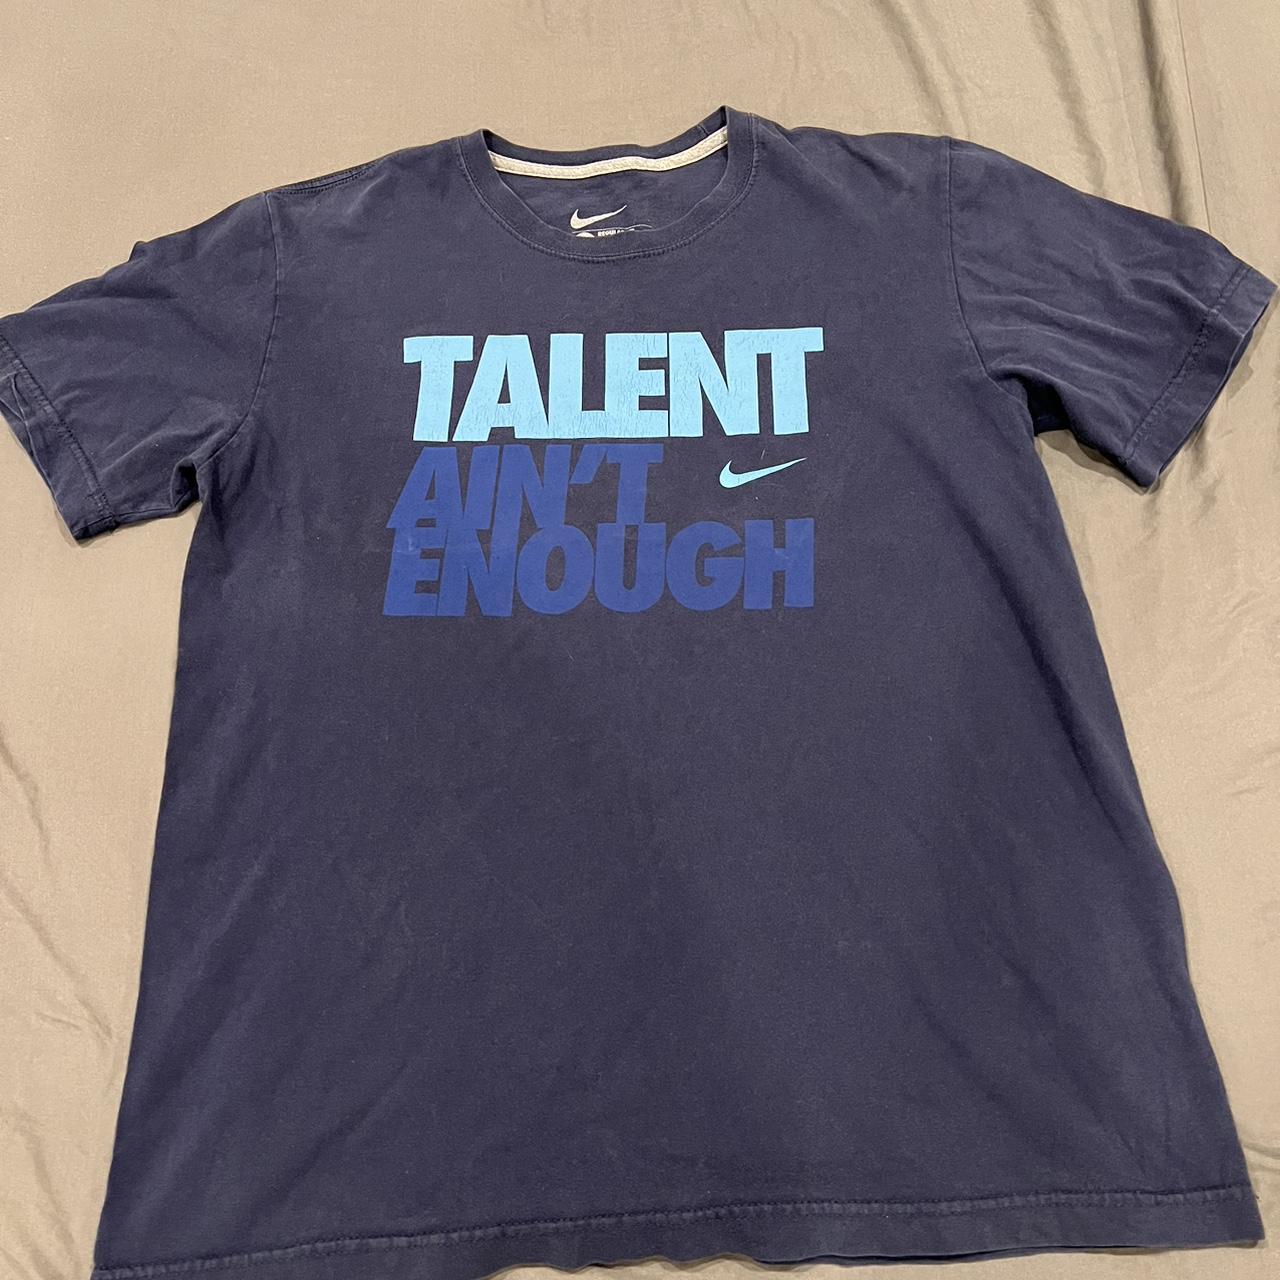 talent ain’t enough nike tee amazing condition... - Depop